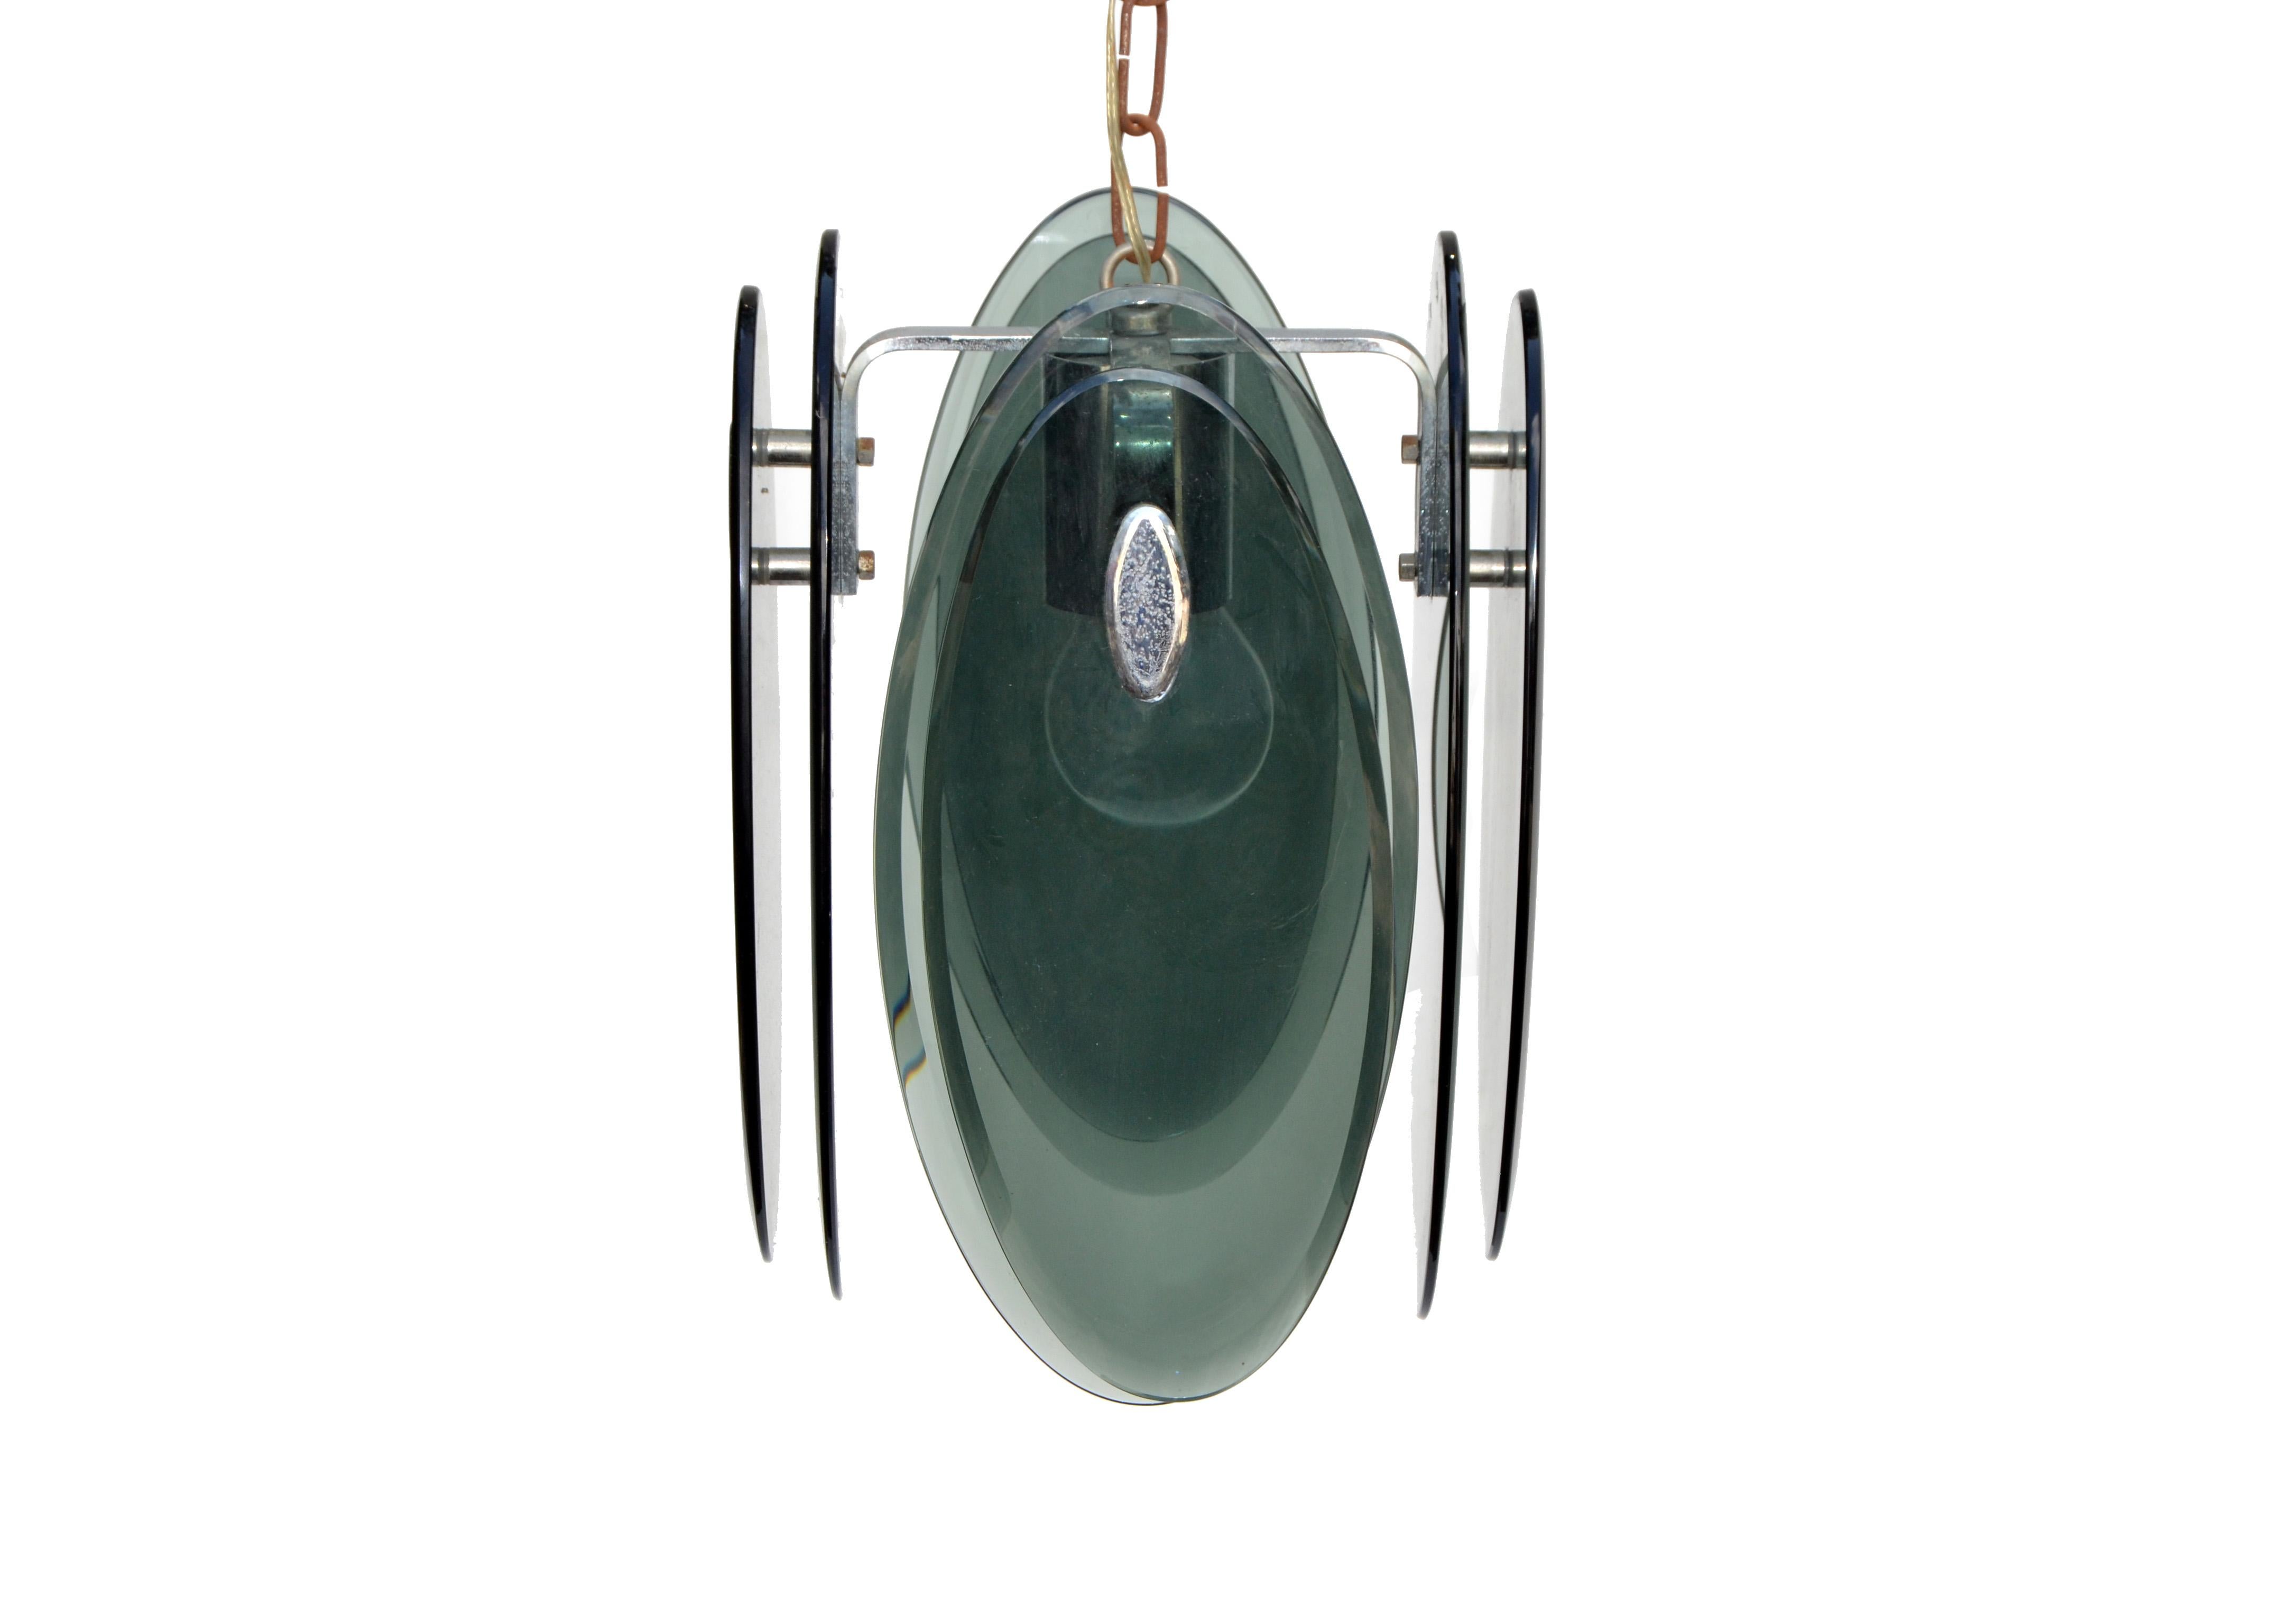 Early Mid-Century Modern Italian beveled thick glass and chrome pendant light fixture by Fontana Arte from the 1960s.
The fixture has eight thick beveled smoked glass panels, two on each side, with polished chrome concave details in the middle of